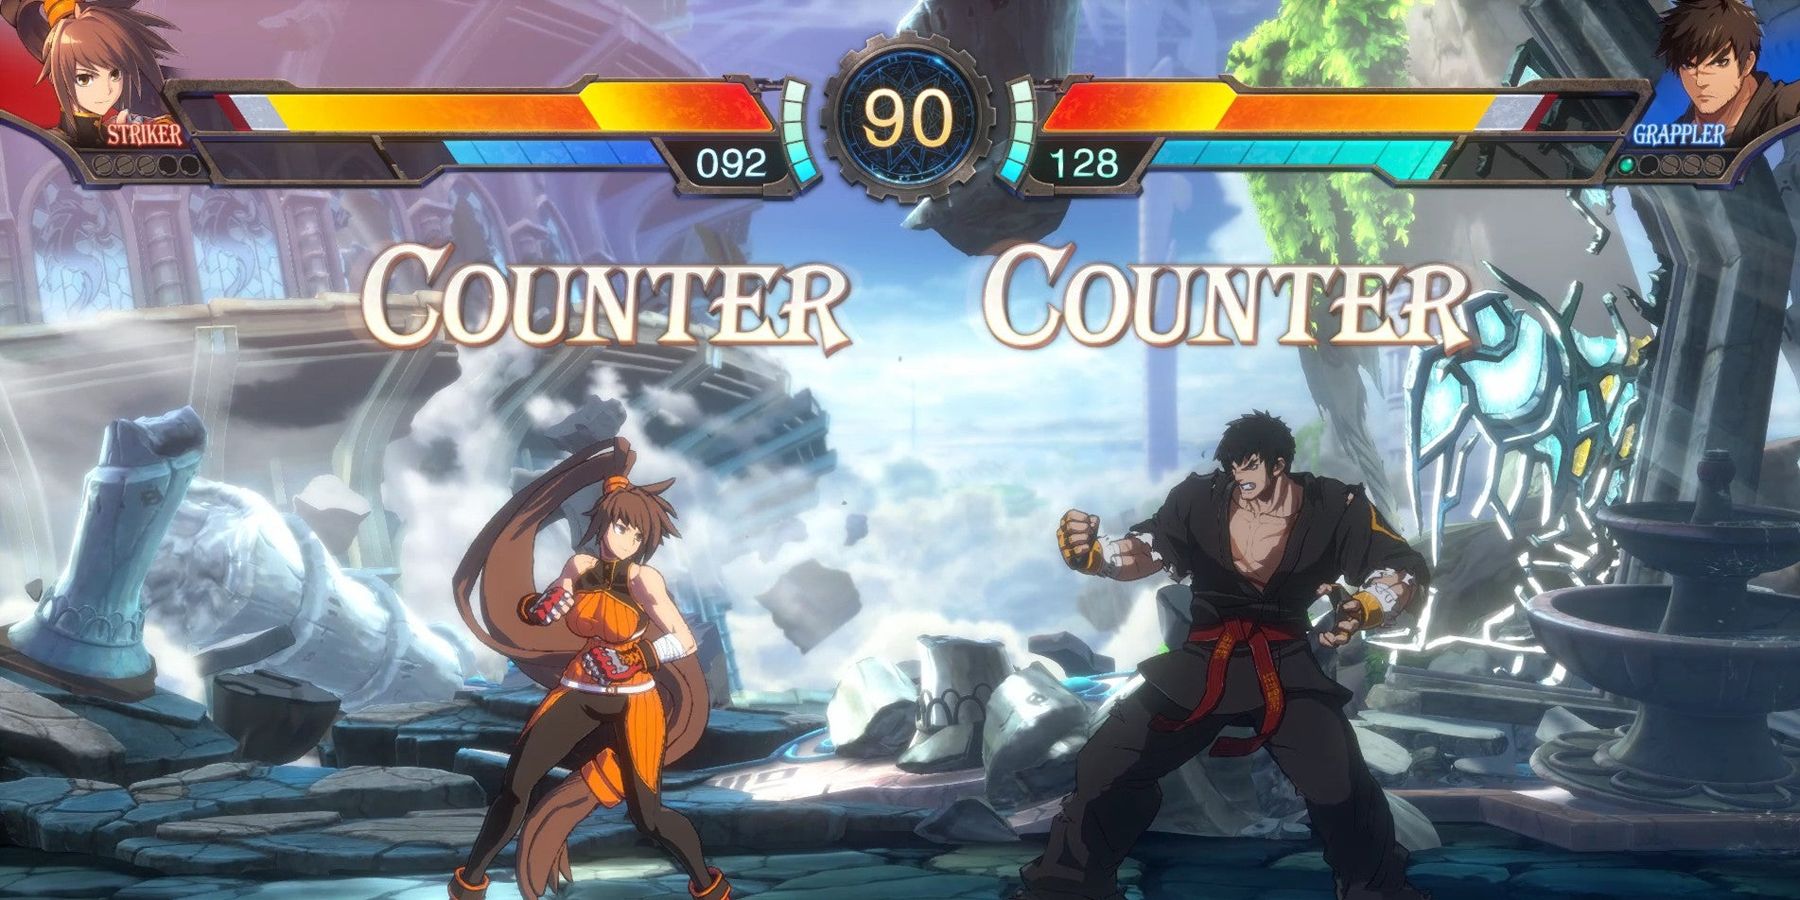 Both DNF fighters doing a Counter